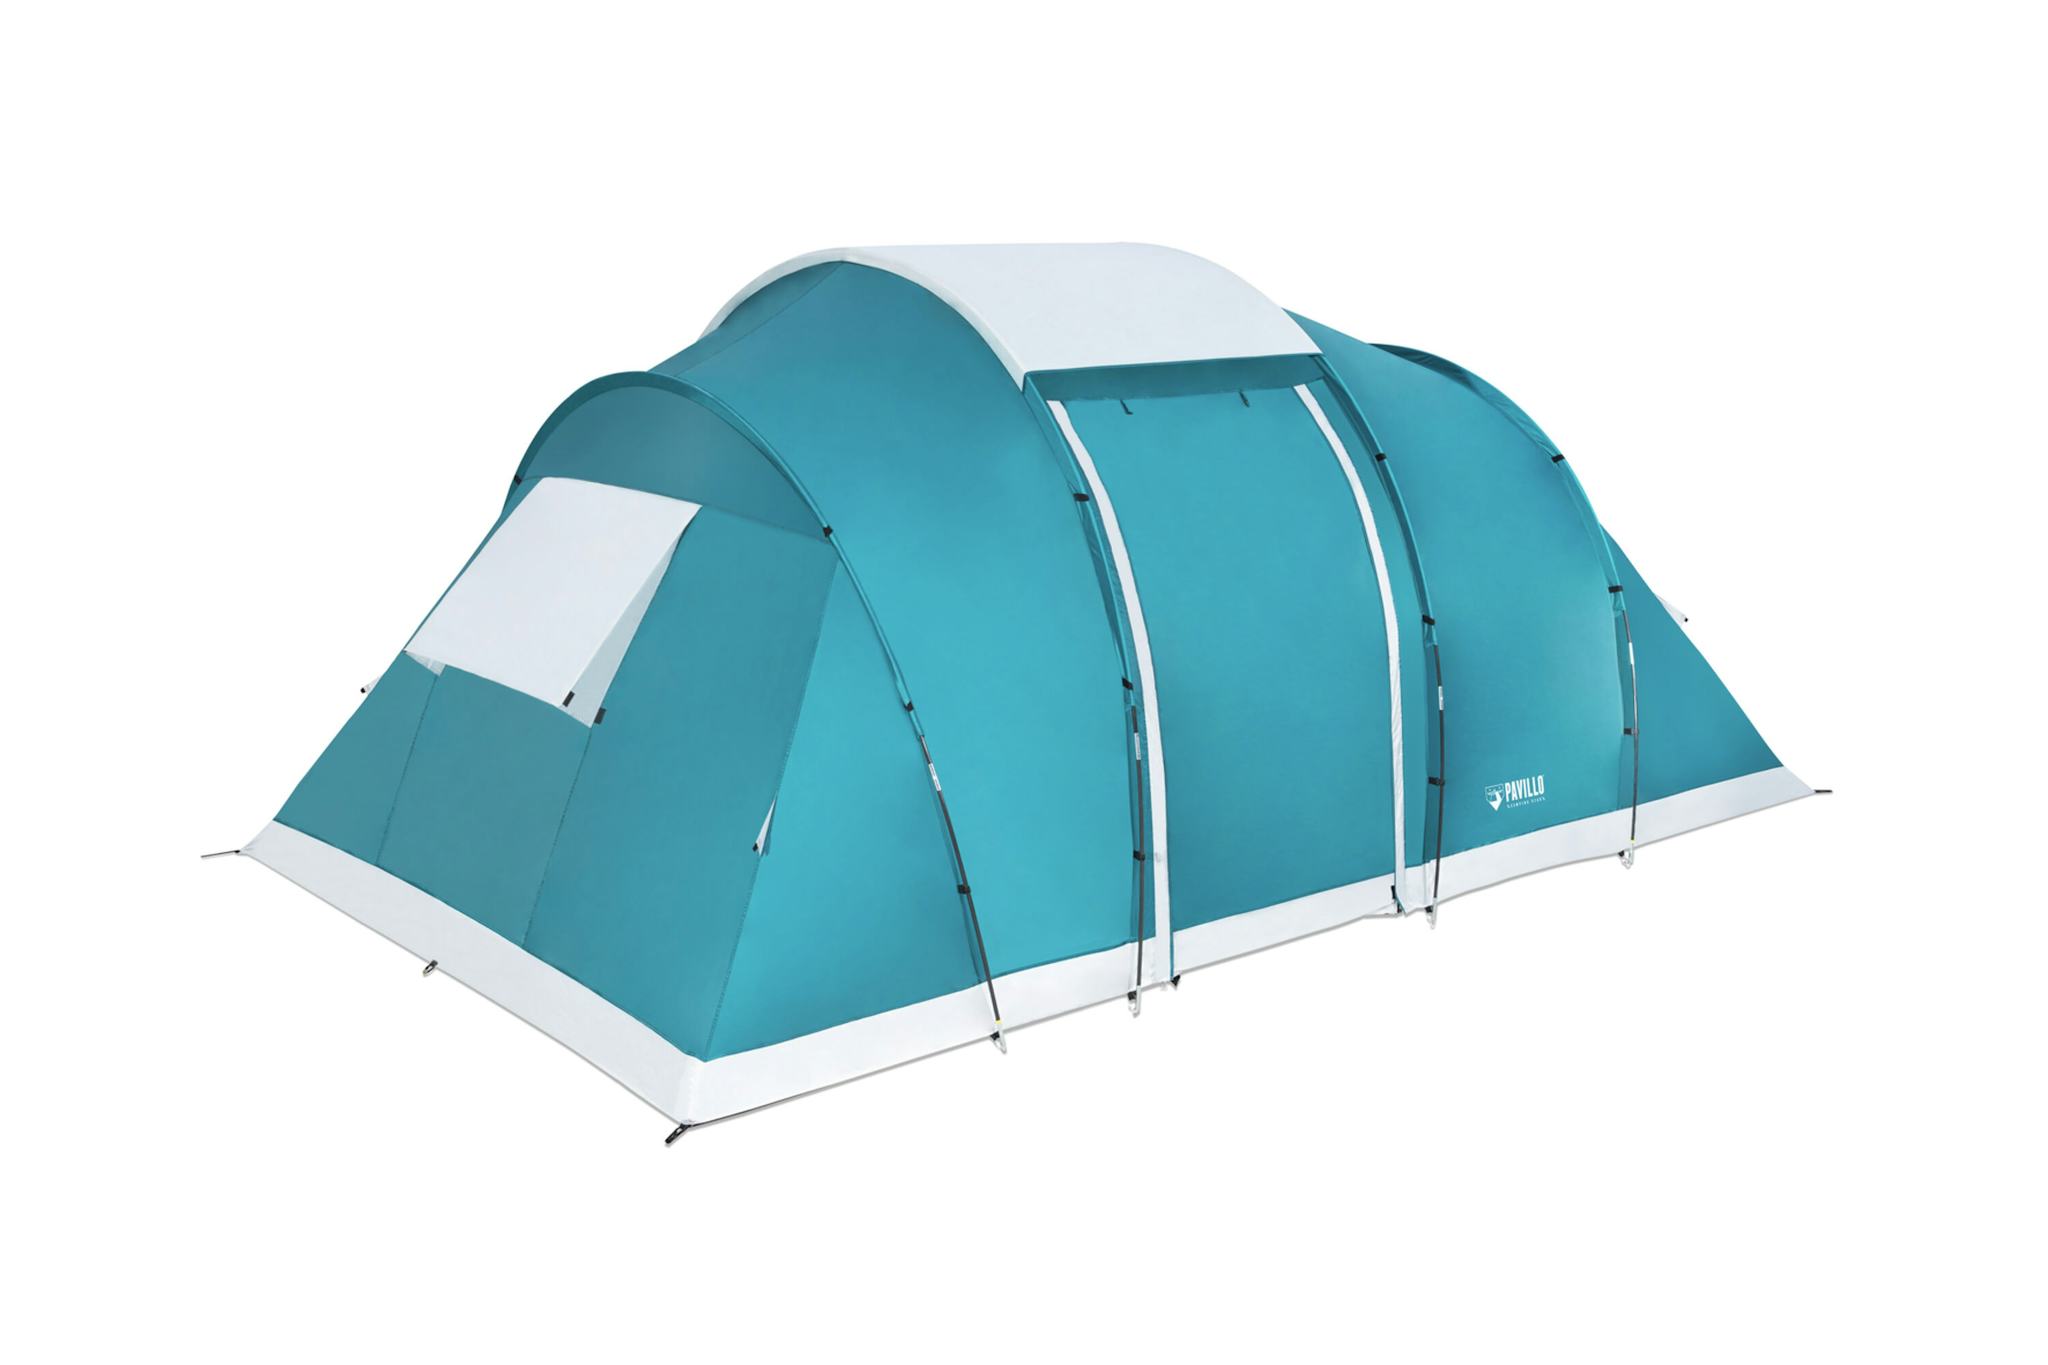 Camping Tente de camping 6 places Family Ground 6 Bestway™ 490 x 280 x 200 cm Bestway 3